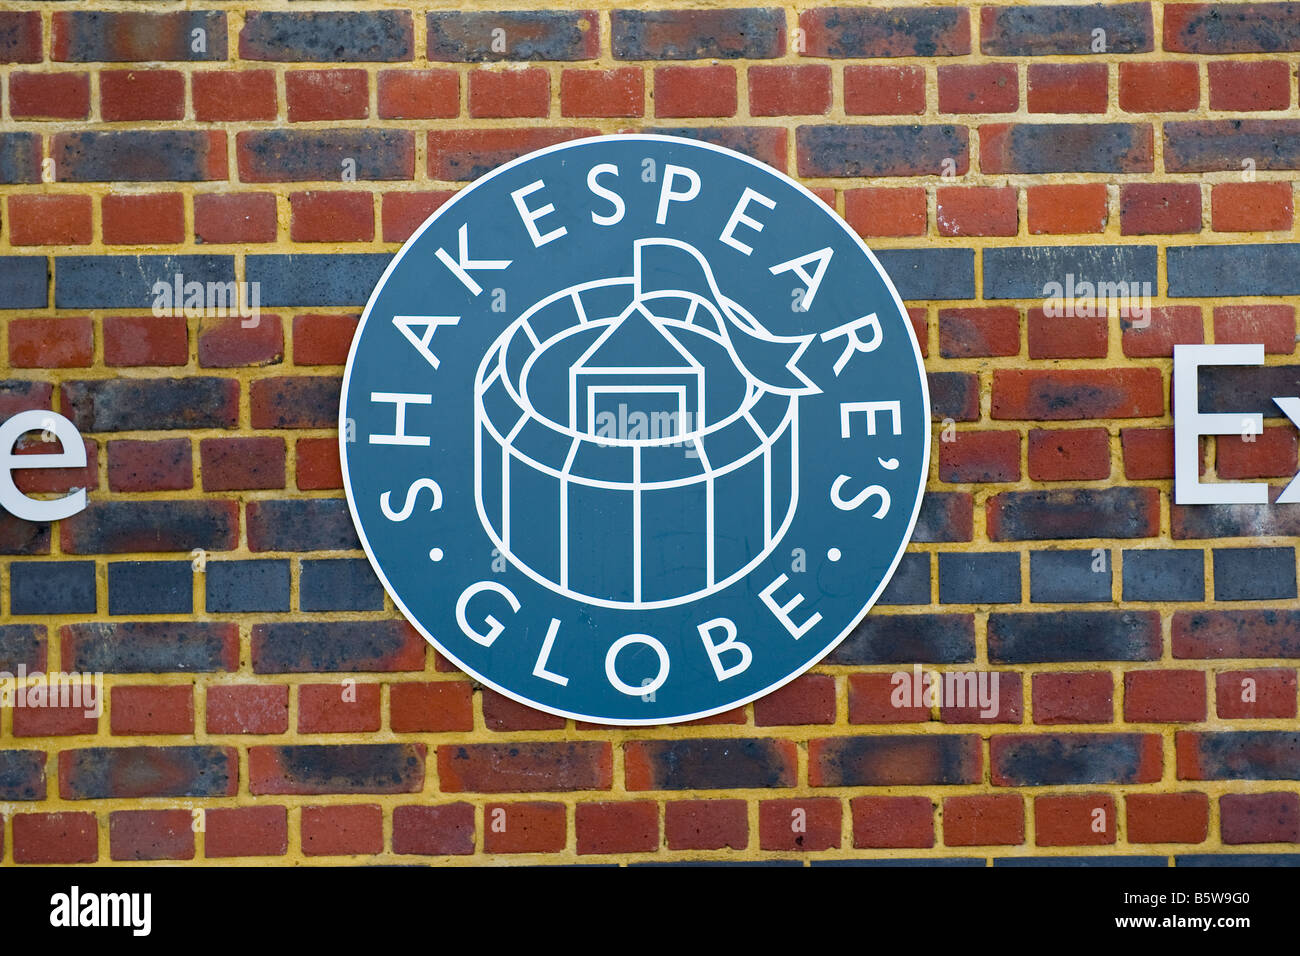 London ,  South Bank or Southbank , The Shakespeare's Globe Theatre wall sign and logo Stock Photo